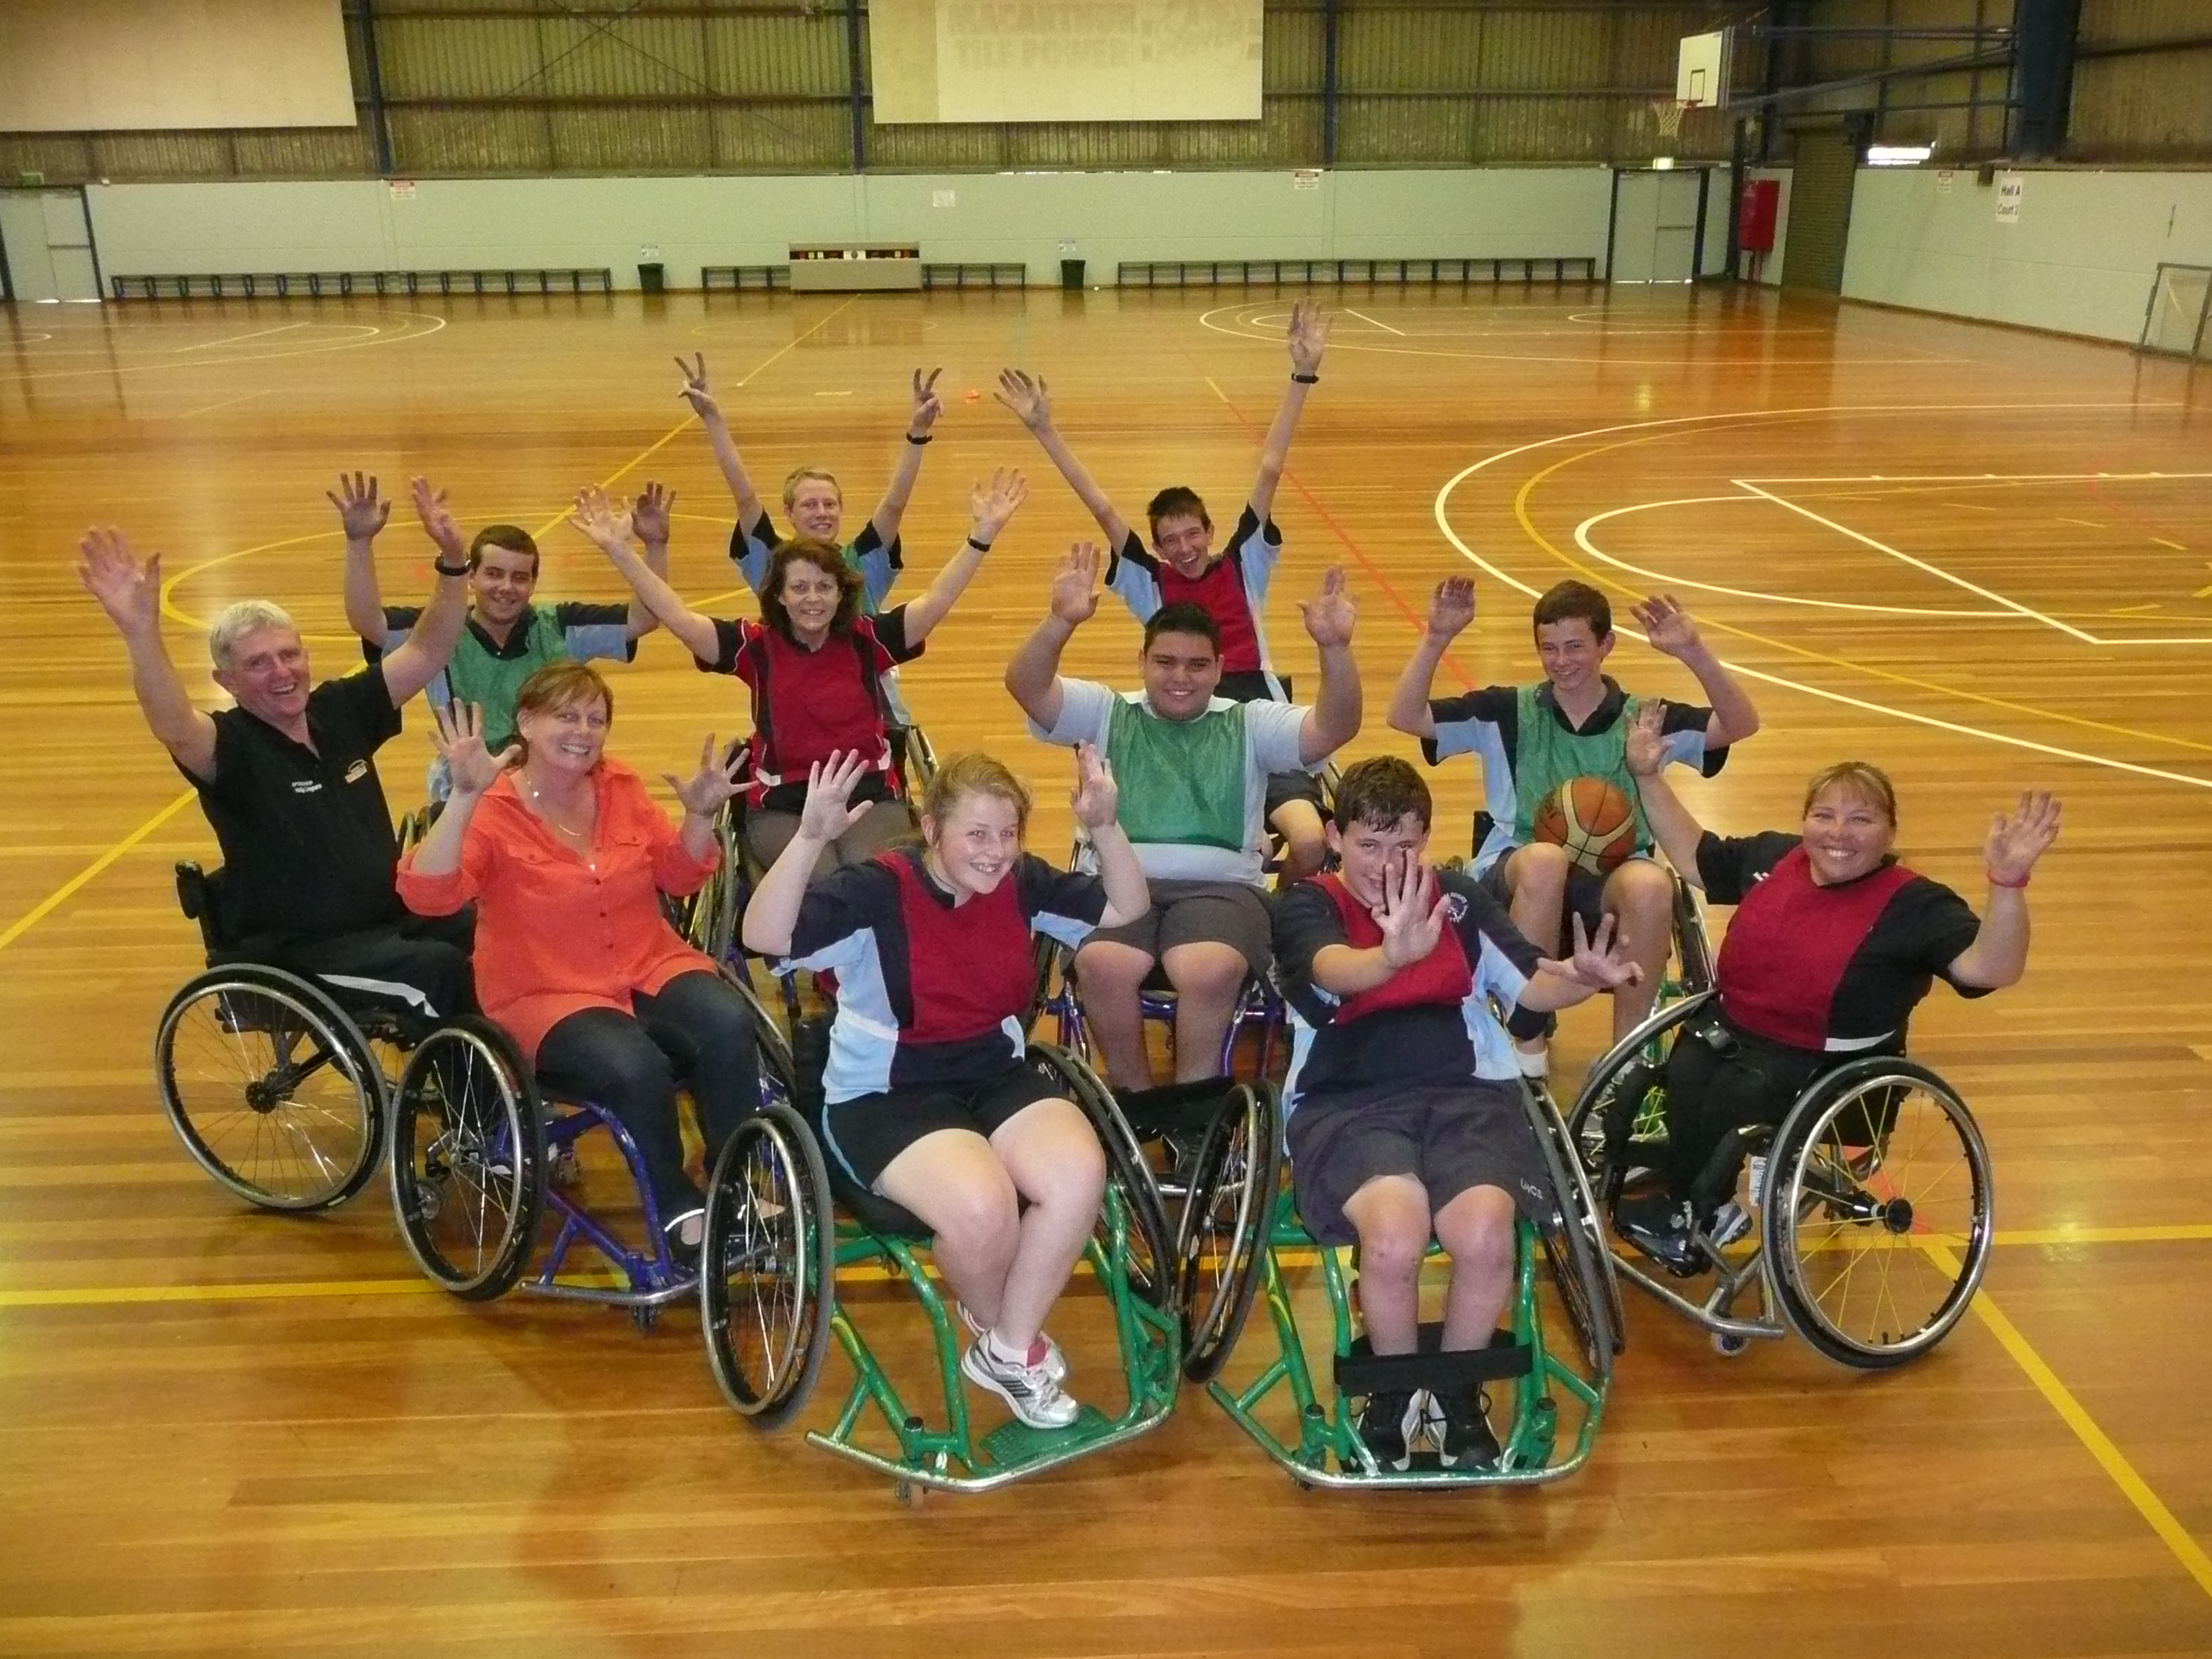 Wheelchair Basketball Clinic with Paralympians, Kylie Gauchi and Gerry Hewson.